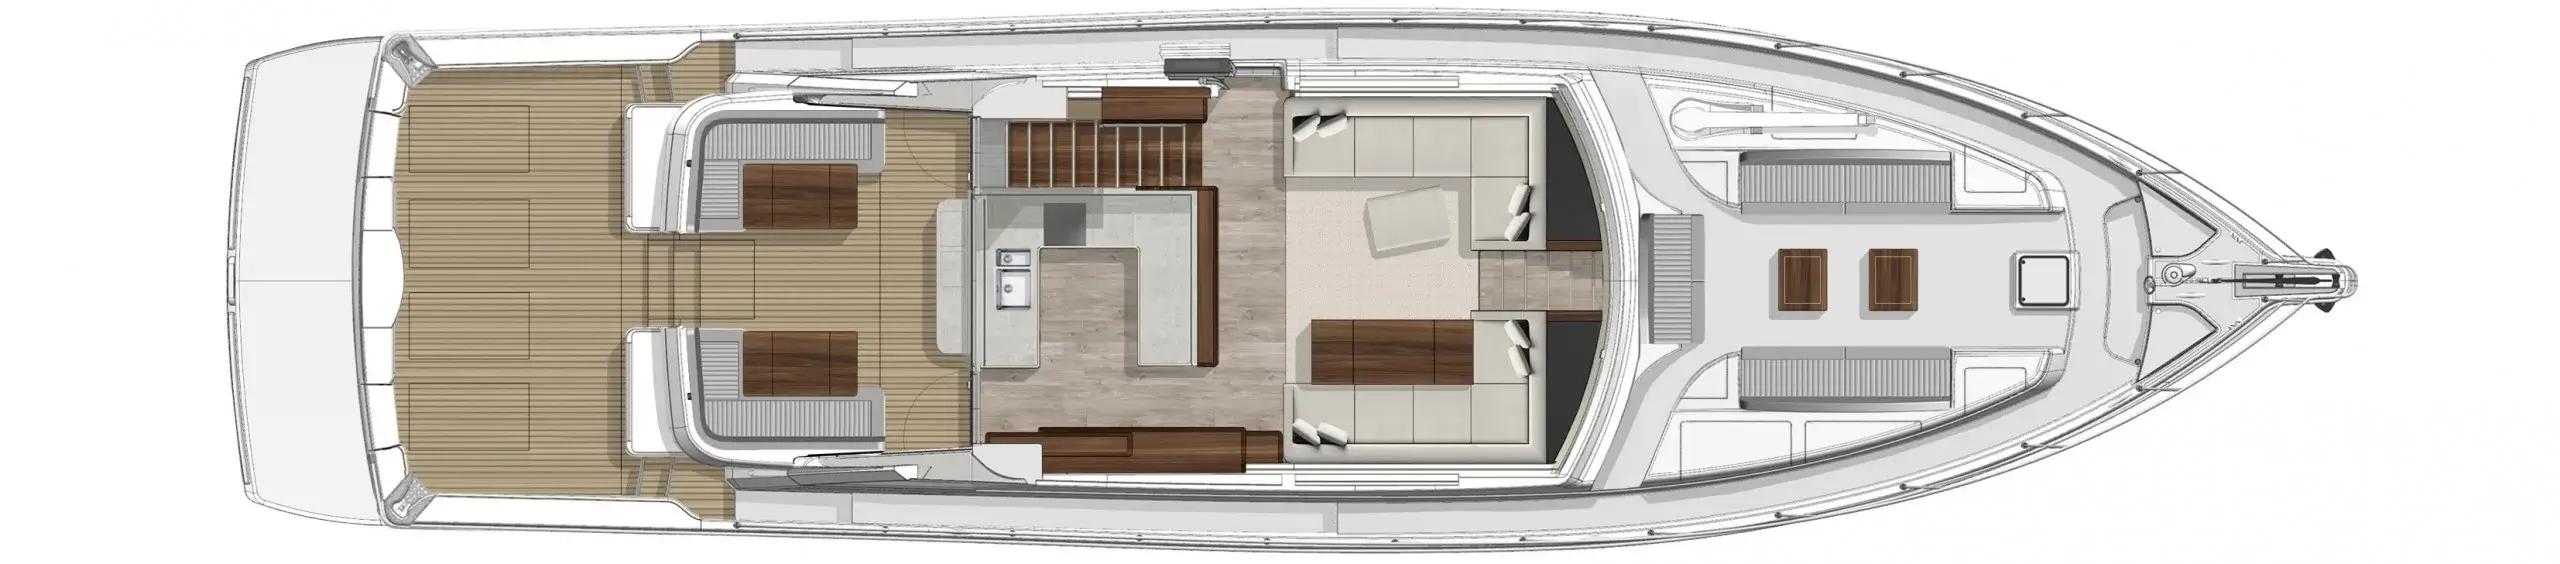 Riviera 72 Sports Motor Yacht Saloon with Optional Forward Deck